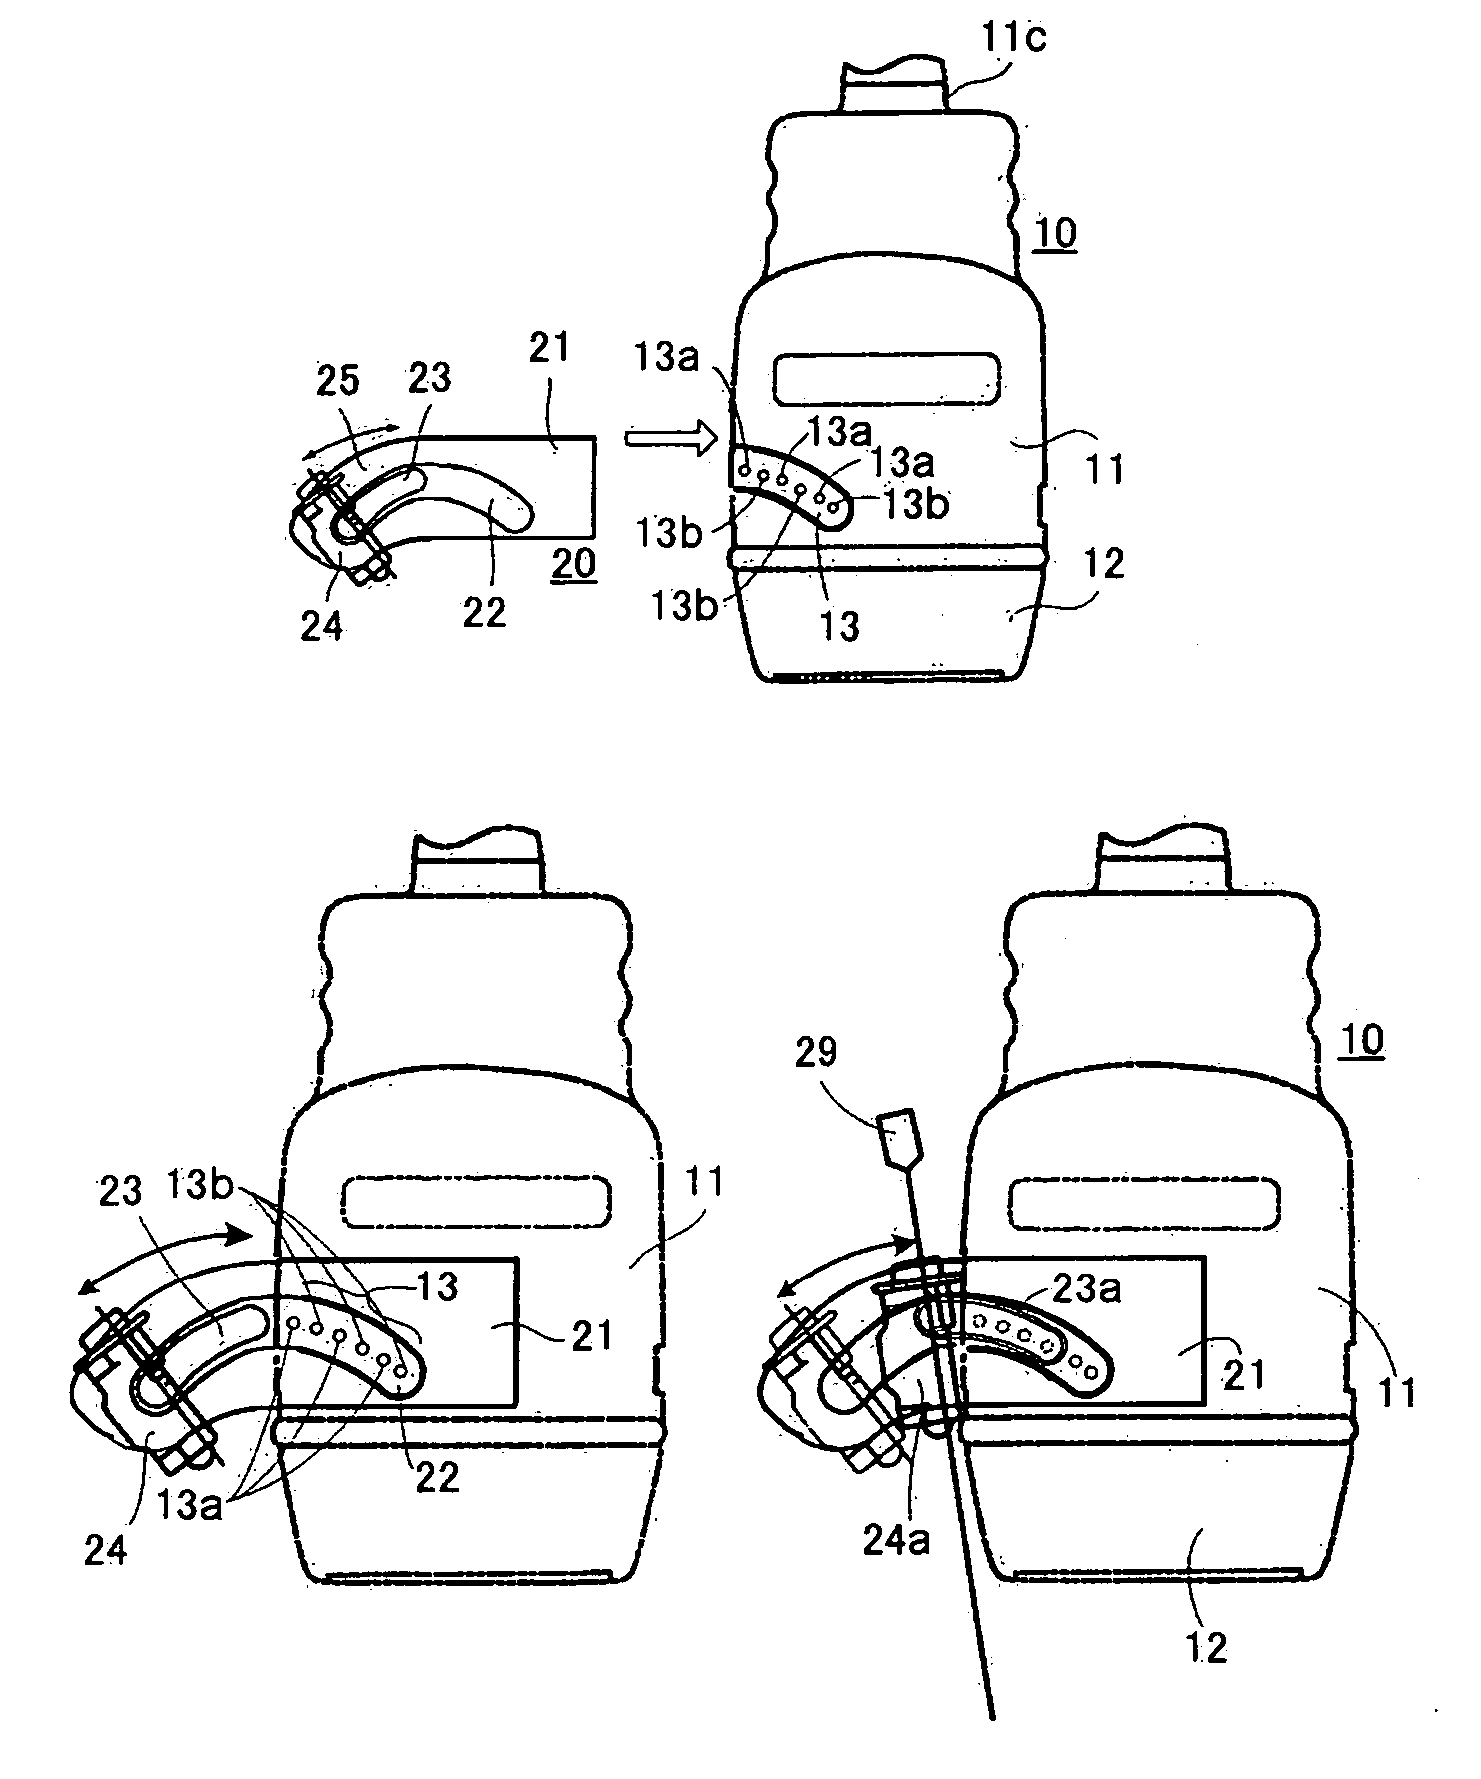 Puncture adaptor, ultrasonic probe for puncture, ultrasonic diagnostic apparatus for puncture, method for detecting angle of puncture needle